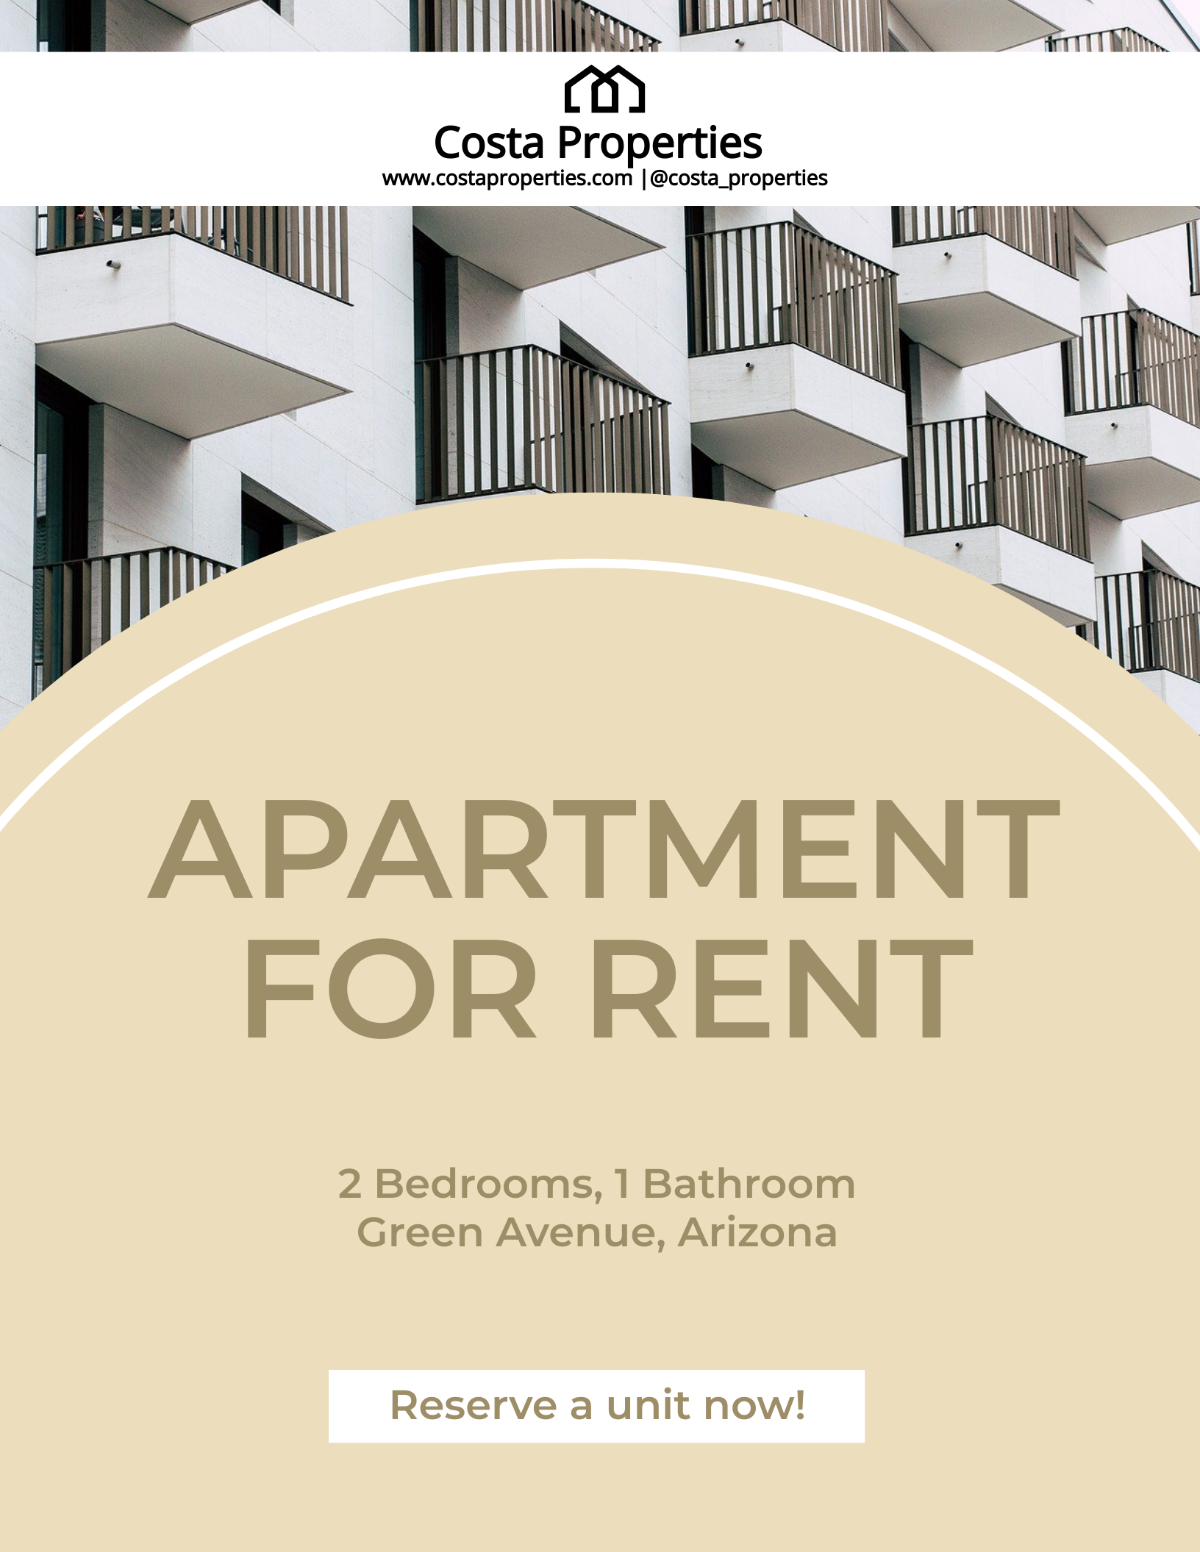 Apartment For Rent Flyer Template